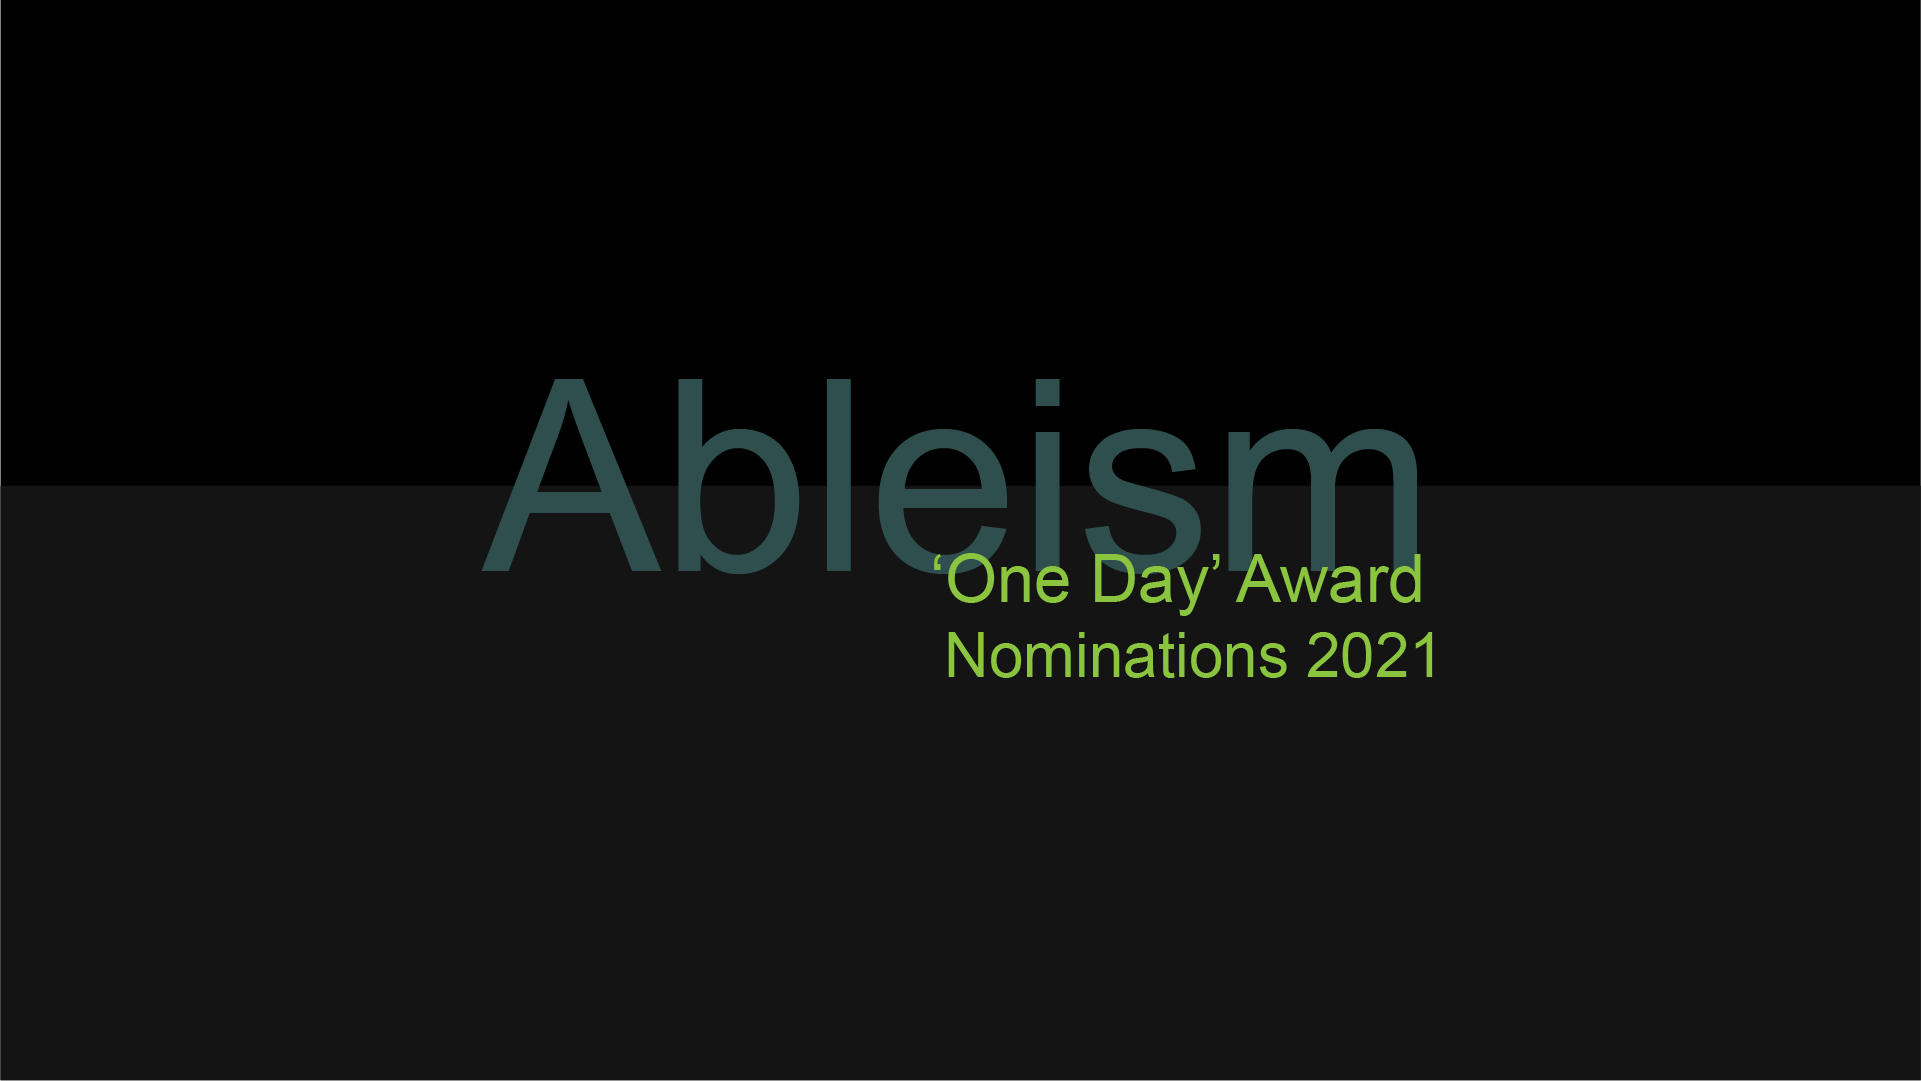 ableism - One Day Award nominations 2021